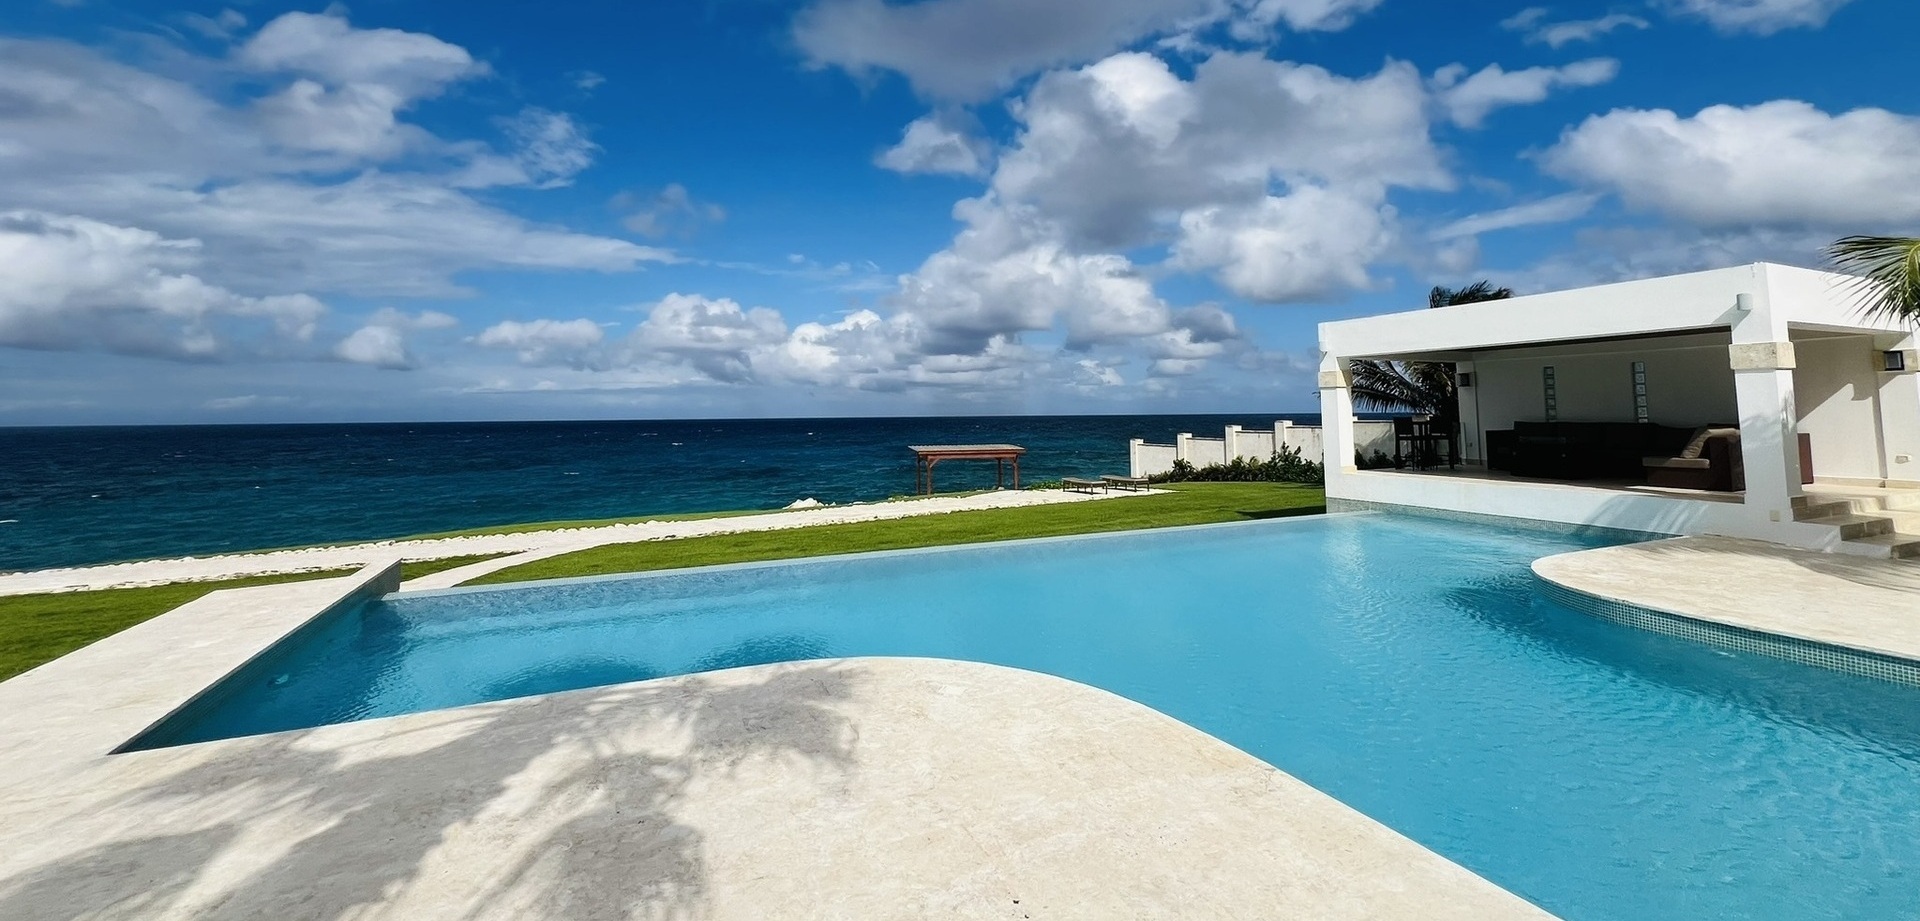 #0 Luxury living at its finest with this breathtaking oceanfront villa